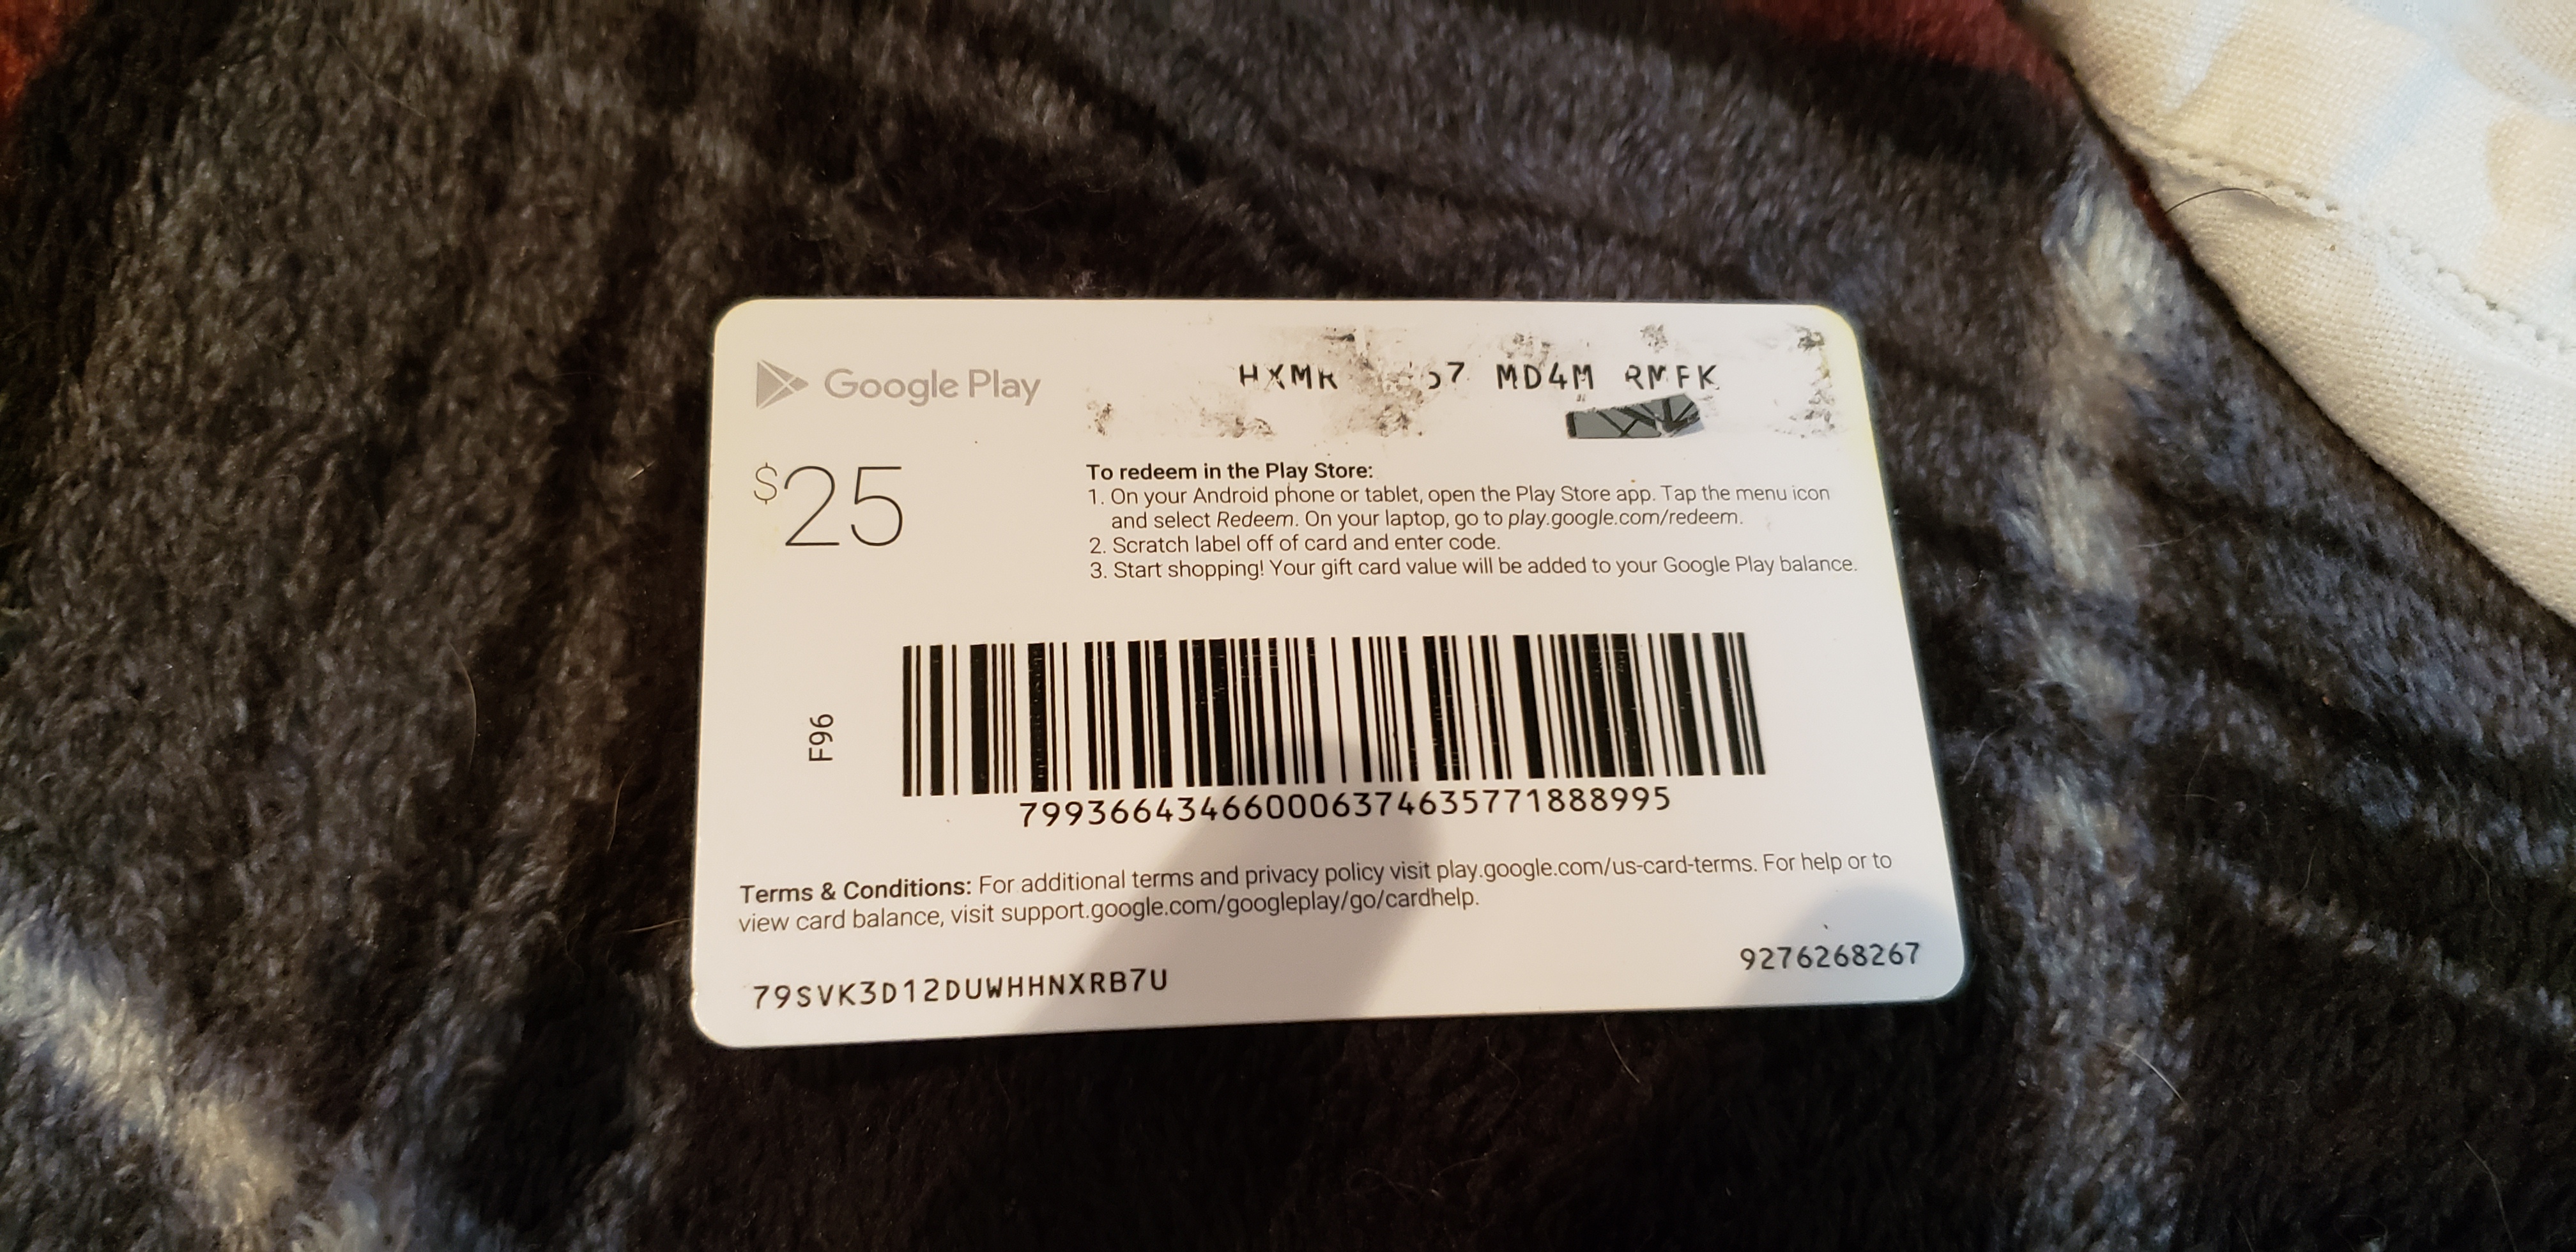 My gift card number is un readable - Google Play Community